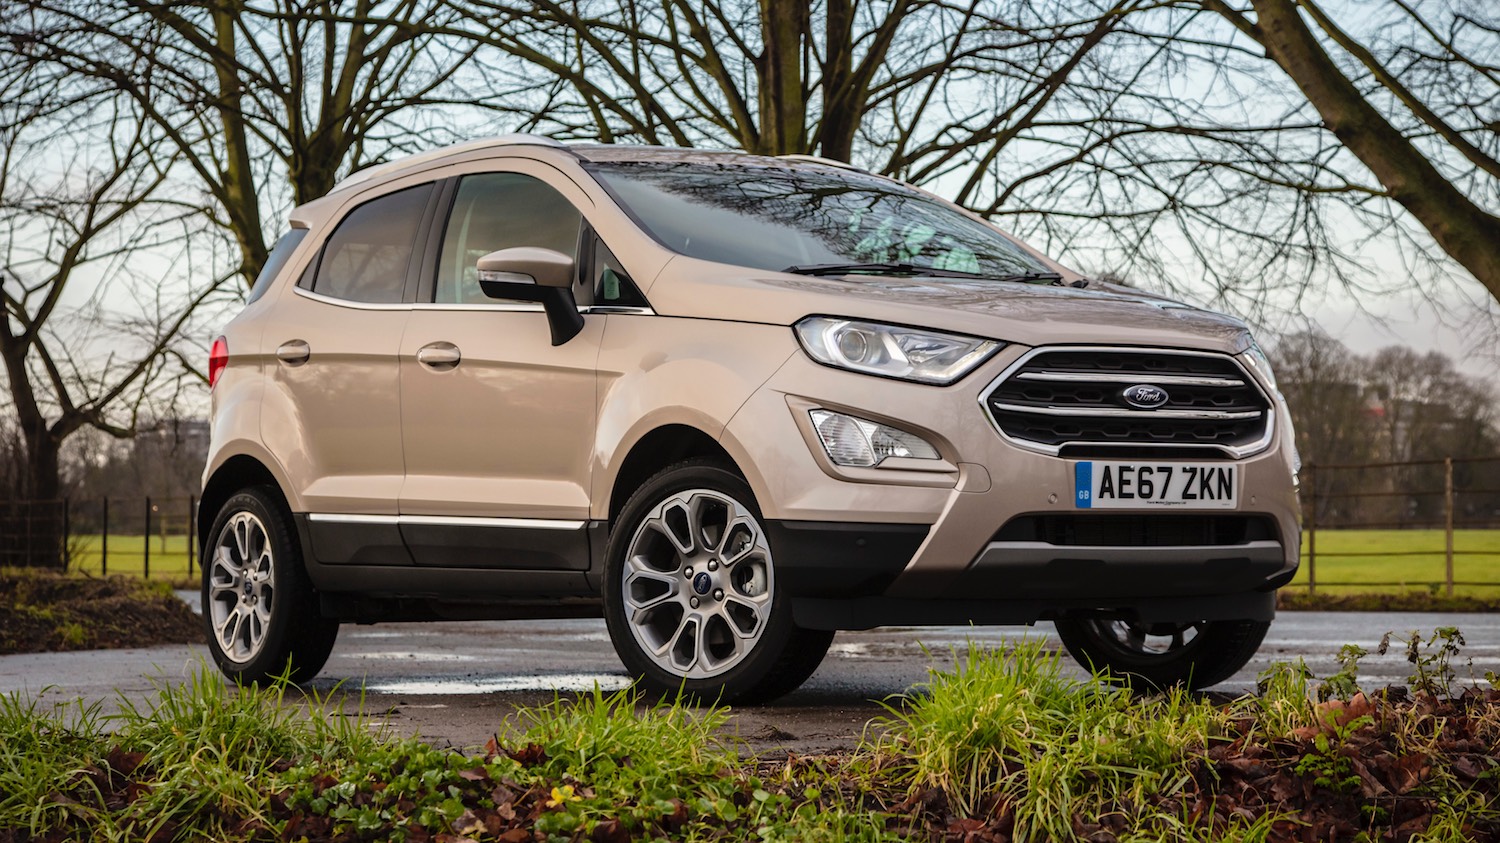 Neil Lyndon reviews the latest Ford EcoSport Titanium for Drive 8